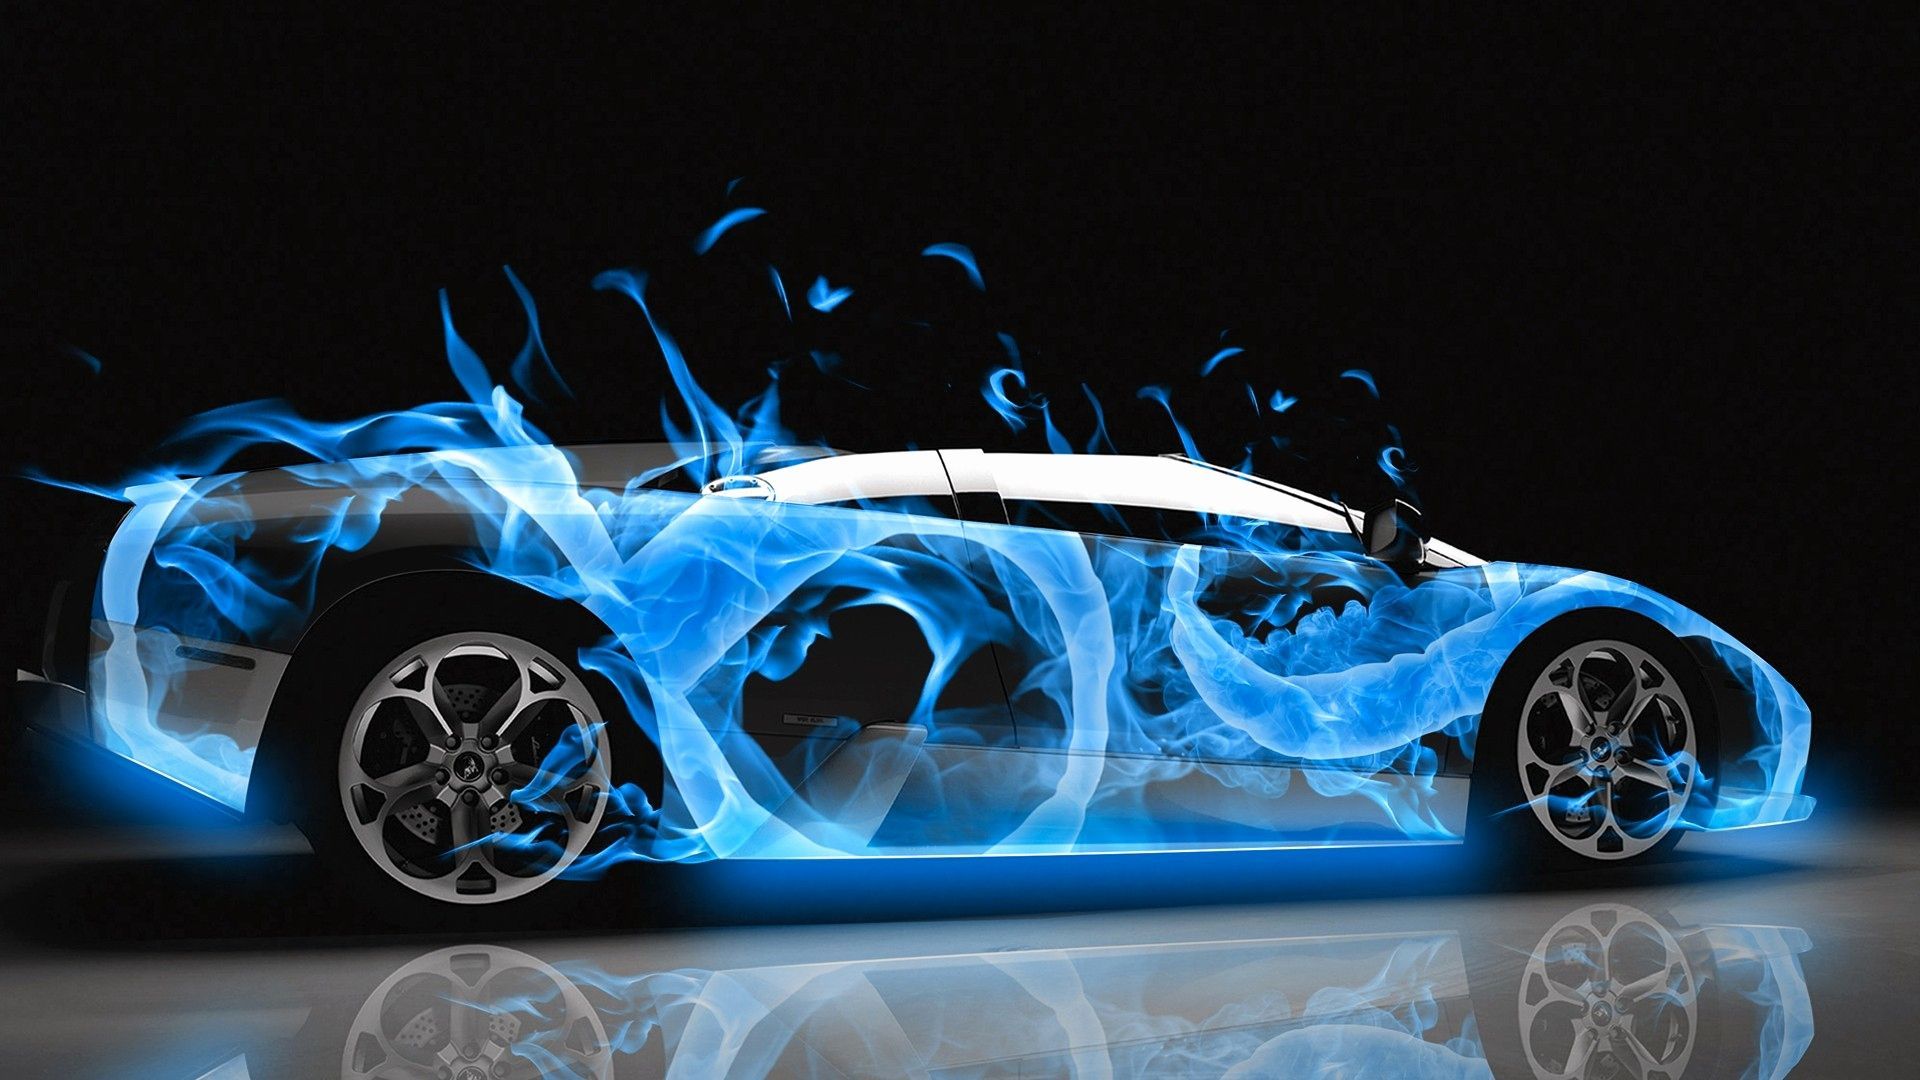 Car Live Wallpaper For Pc Best Of Wallpaper Car Wallpaper Live Wallpaper For Pc Wallpaper & Background Download